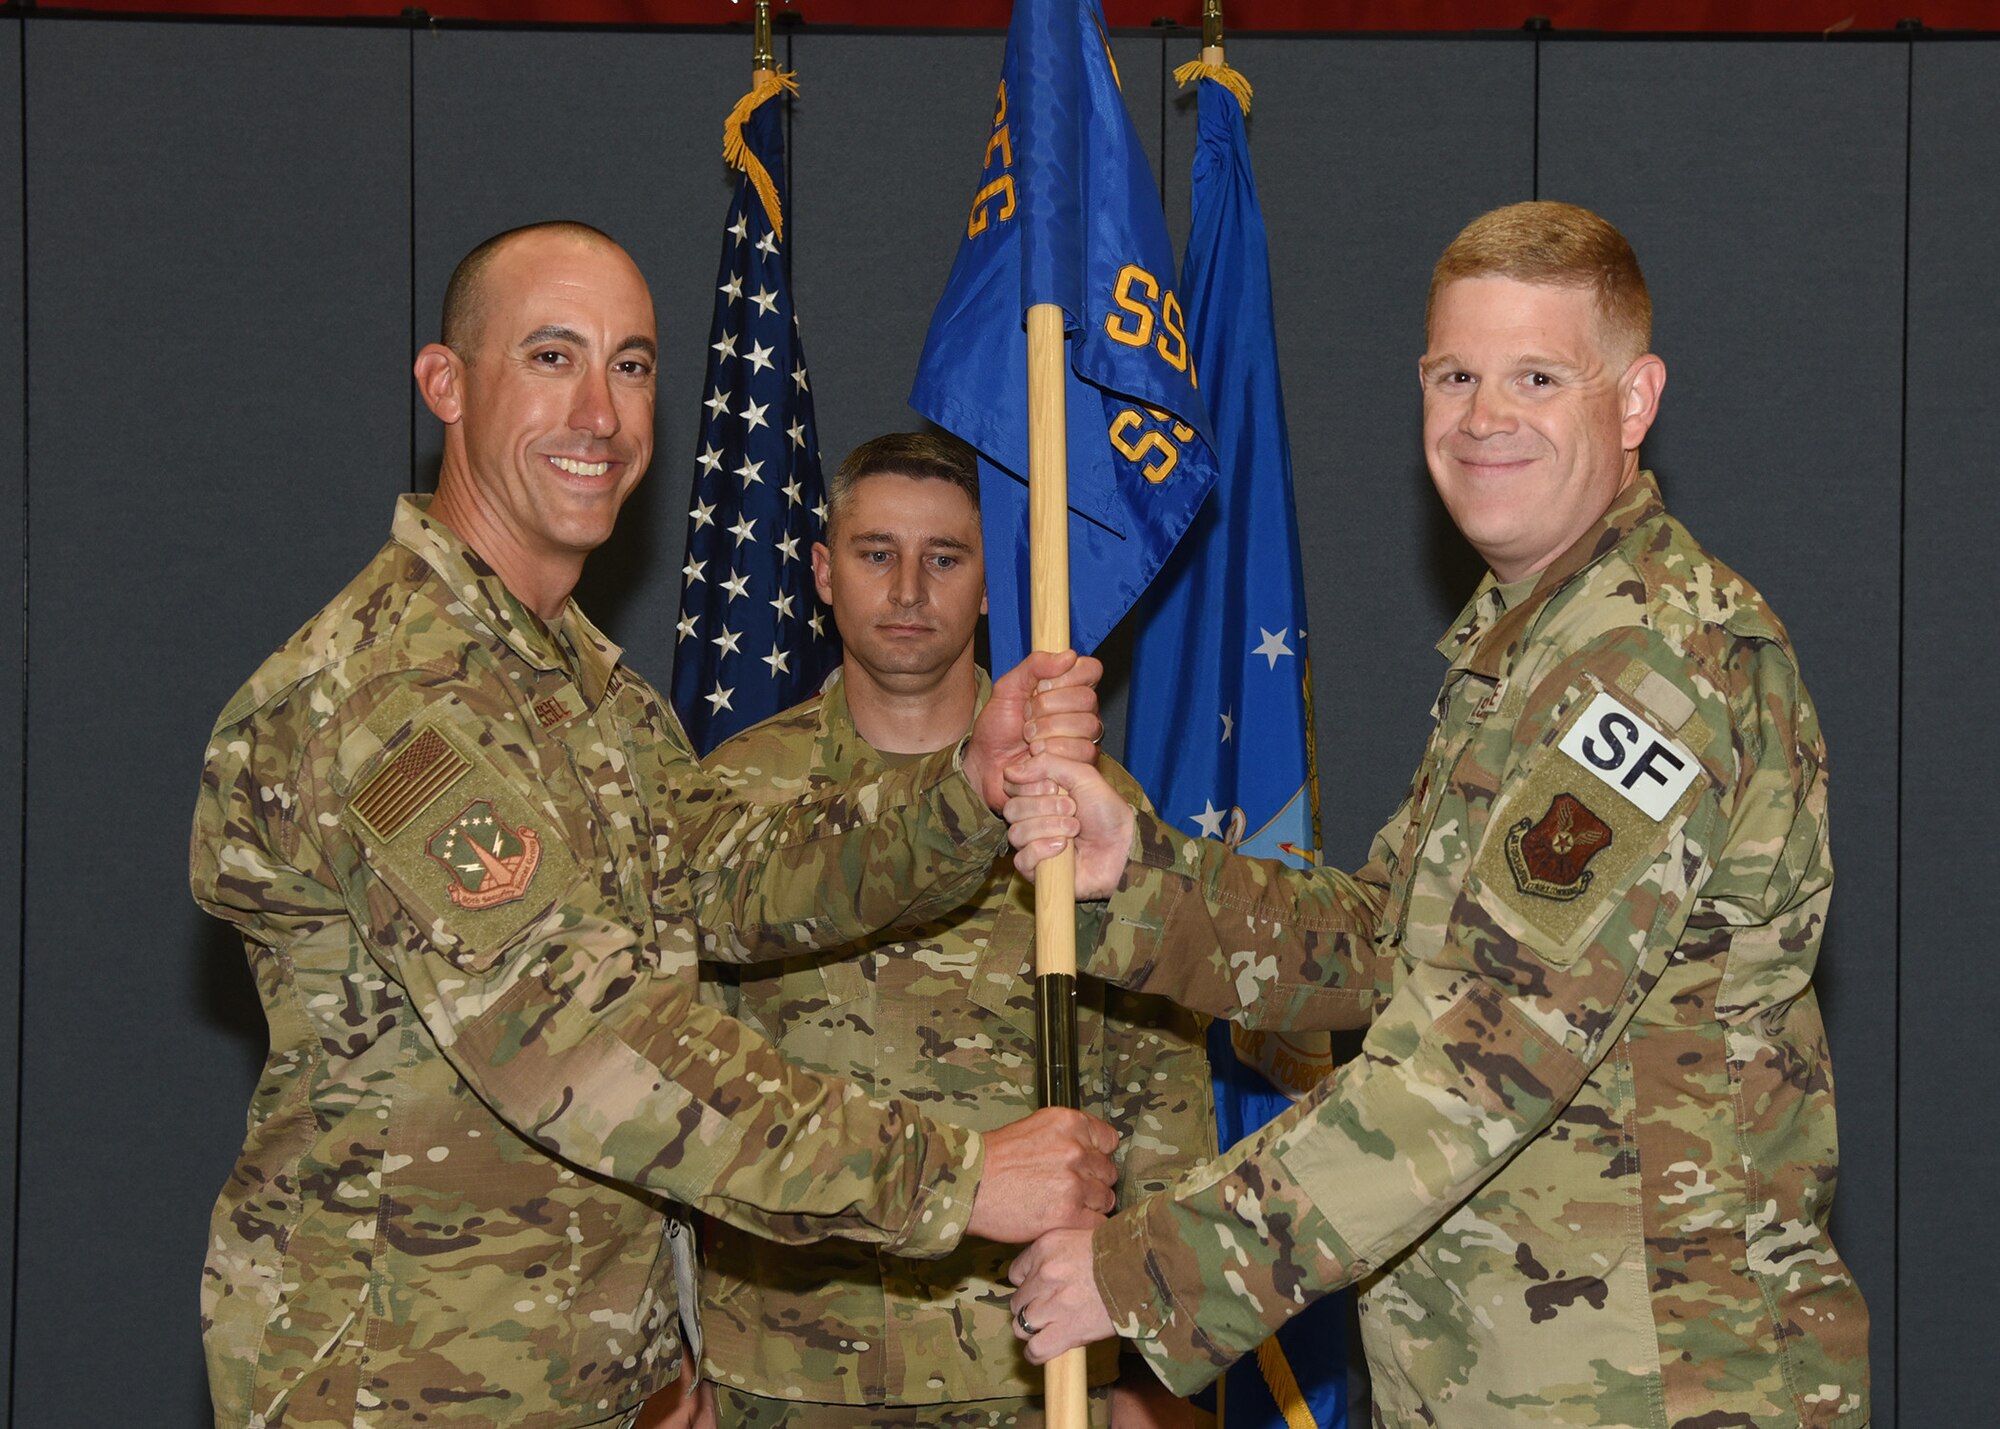 Colonel Damian Schlussel, 90th Security Forces commander, passes the guidon to Maj. Tim Marriner, 90th Security Support Squadron commander, during the 90th SSPTS change of command ceremony October 3, 2019 in the Peacekeeper Security Forces high bay on F.E. Warren Air Force Base, Wyo. The ceremony signified the transition of command from Maj. George Hern to Marriner. (U.S. Air Force photo by Glenn S. Robertson)